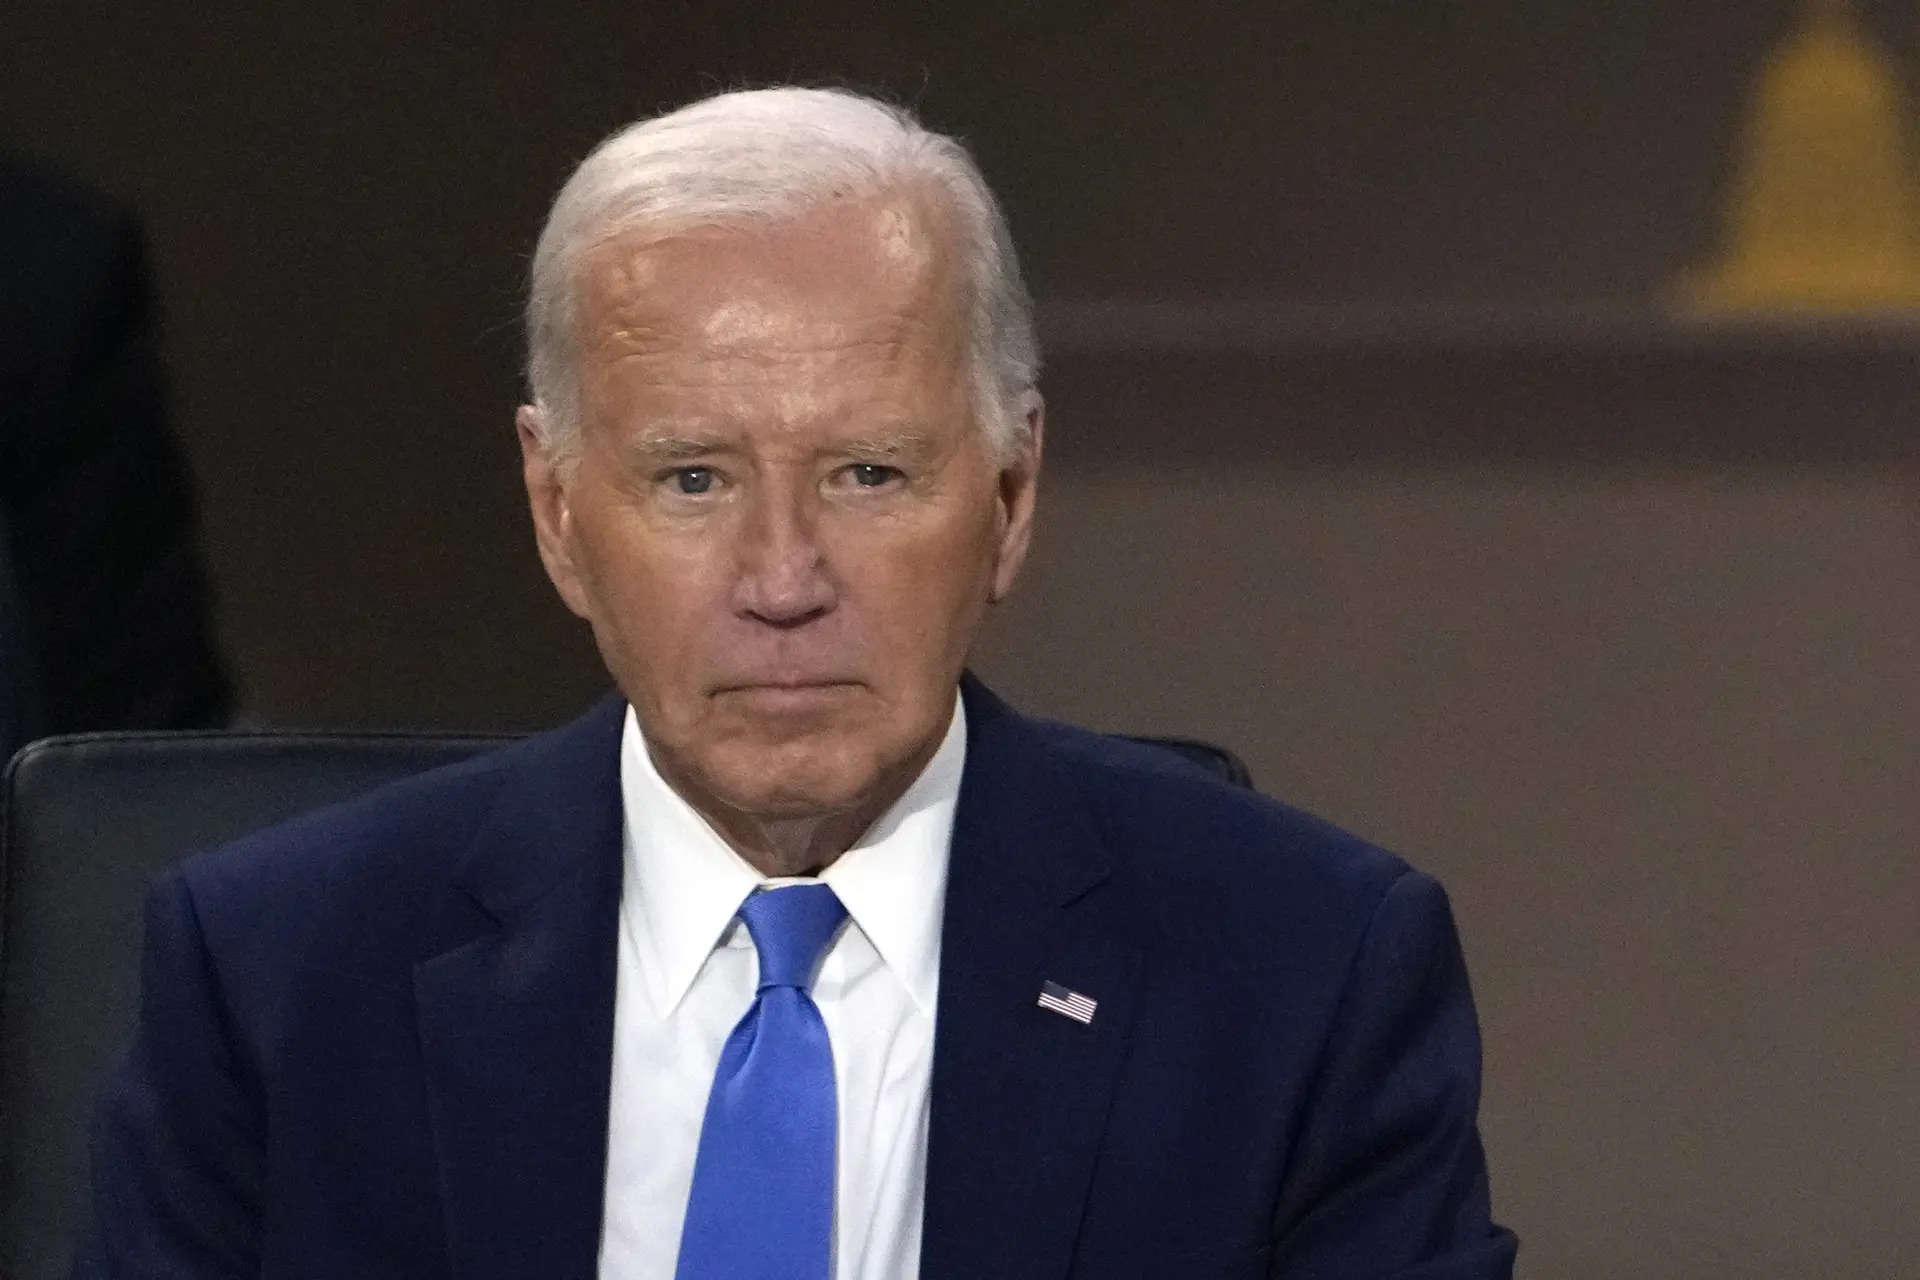 Until 1968, presidential candidates were picked by party conventions - a process revived by Biden's withdrawal from race 